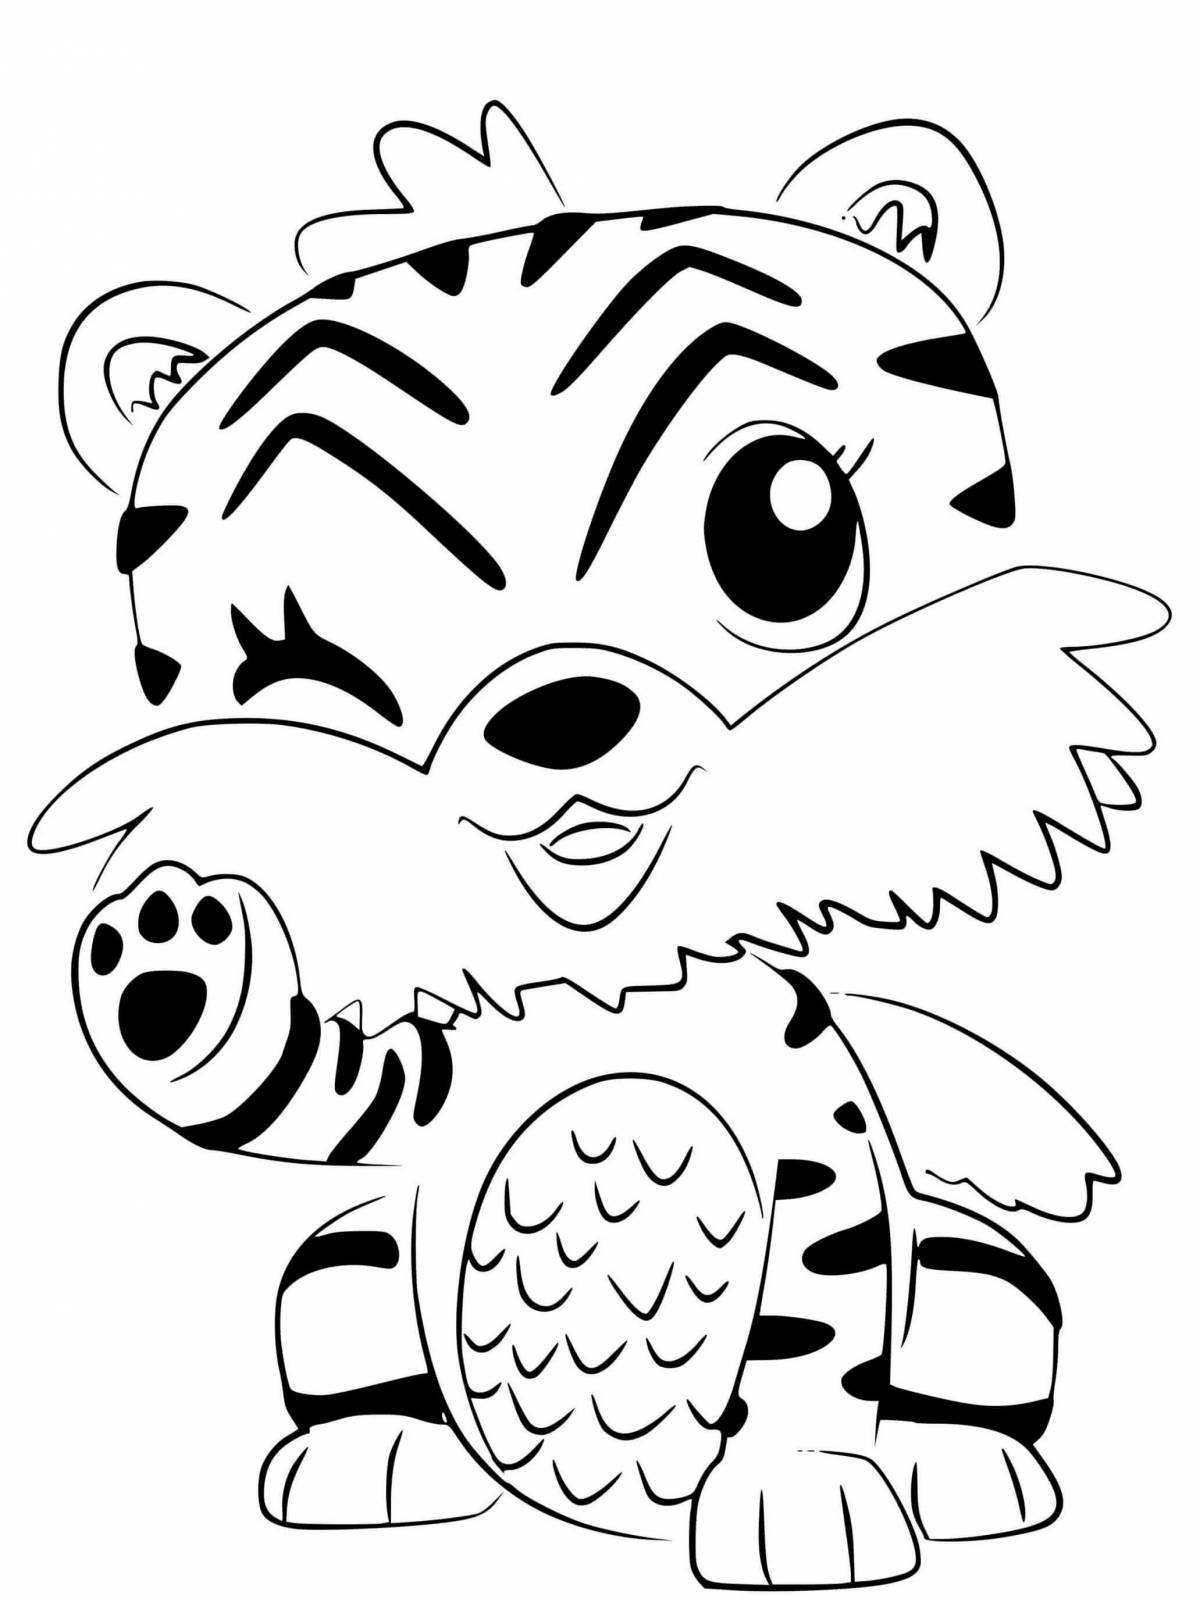 Coloring book inquisitive tiger cub for girls